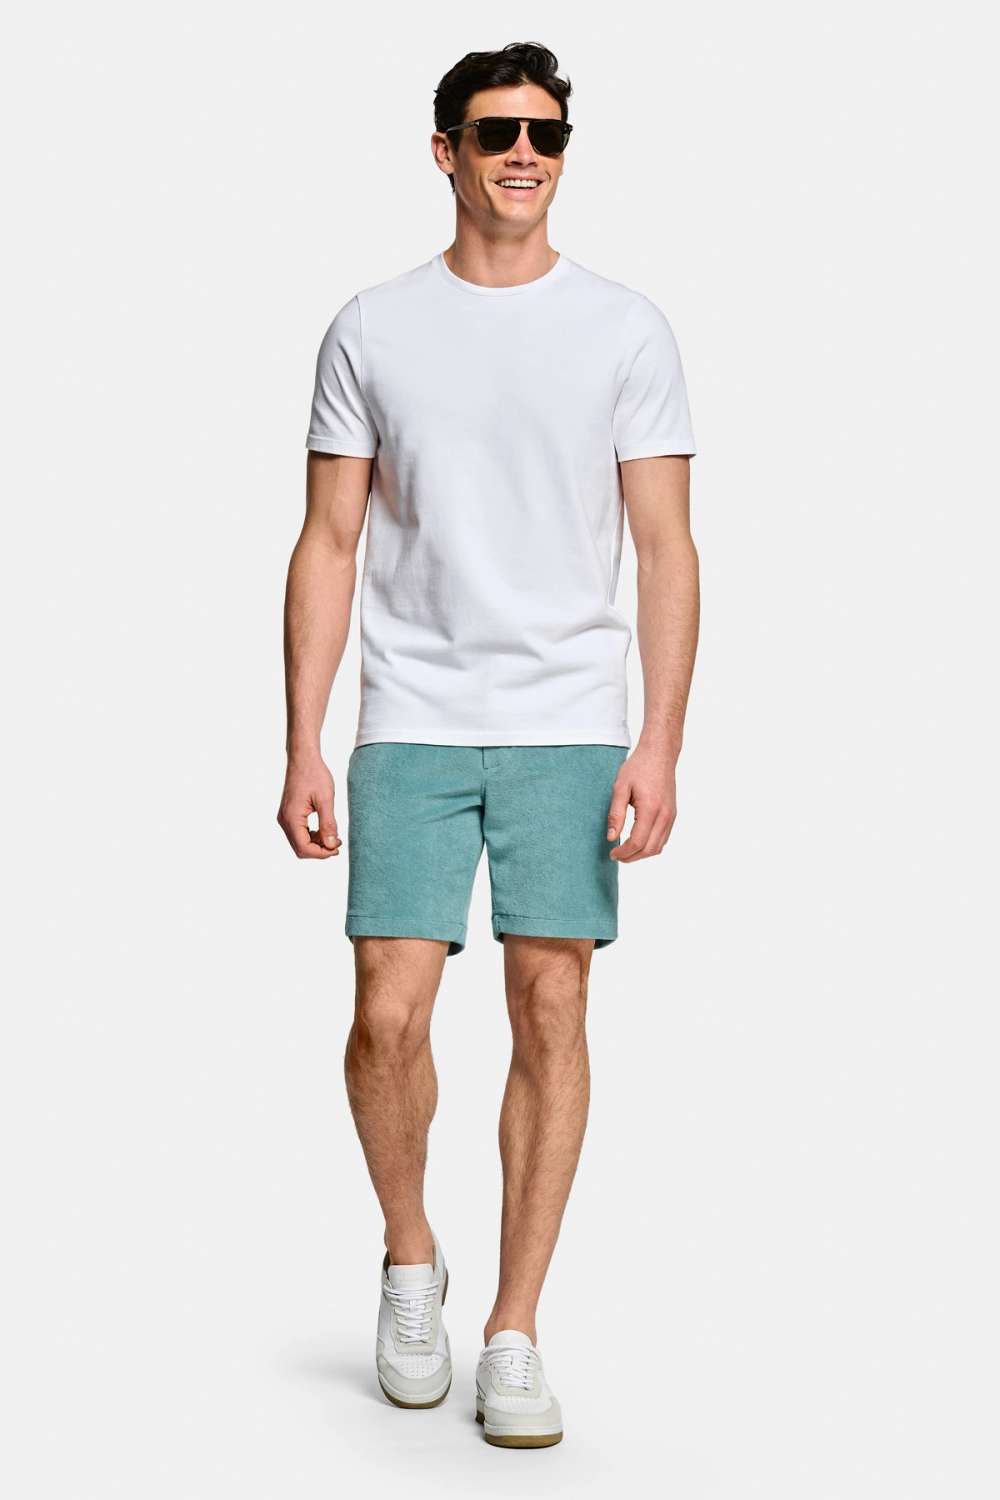 Astons - Die Frottee Shorts